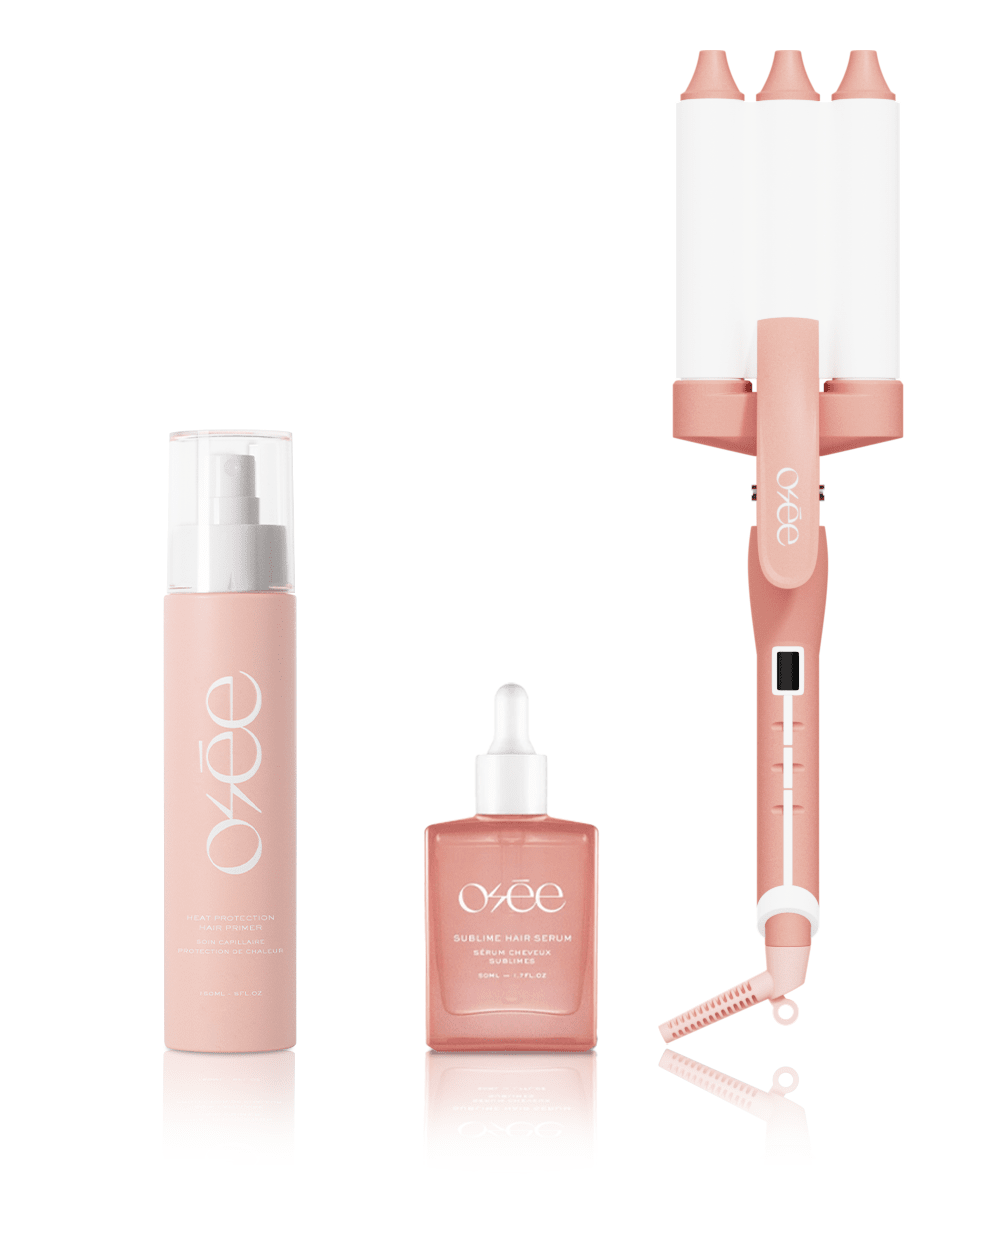 ICONIC WAVY ROUTINE SETS Osée 